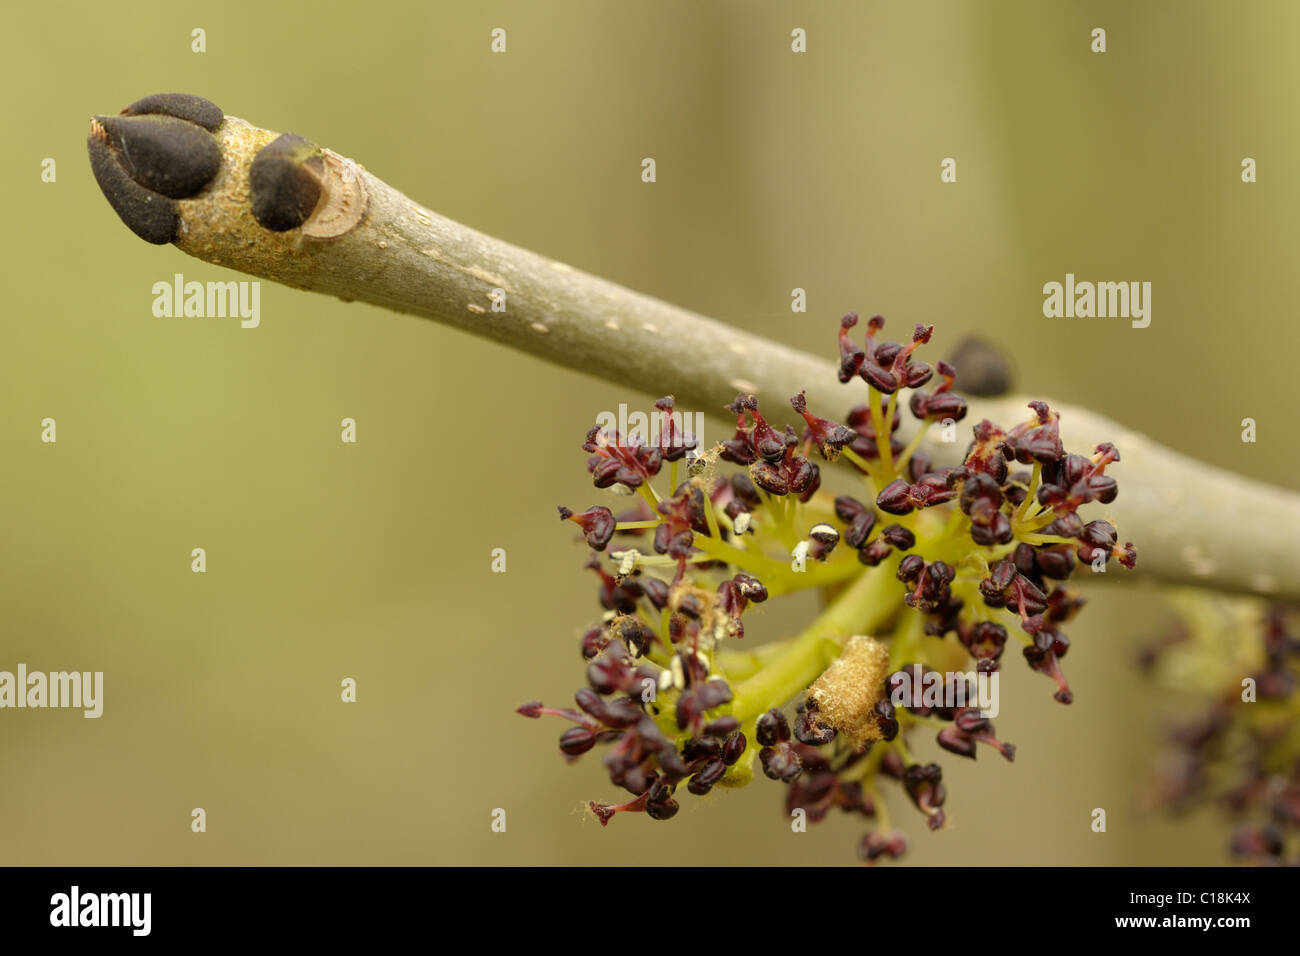 Ash flowers and buds, fraxinus excelsior Stock Photo